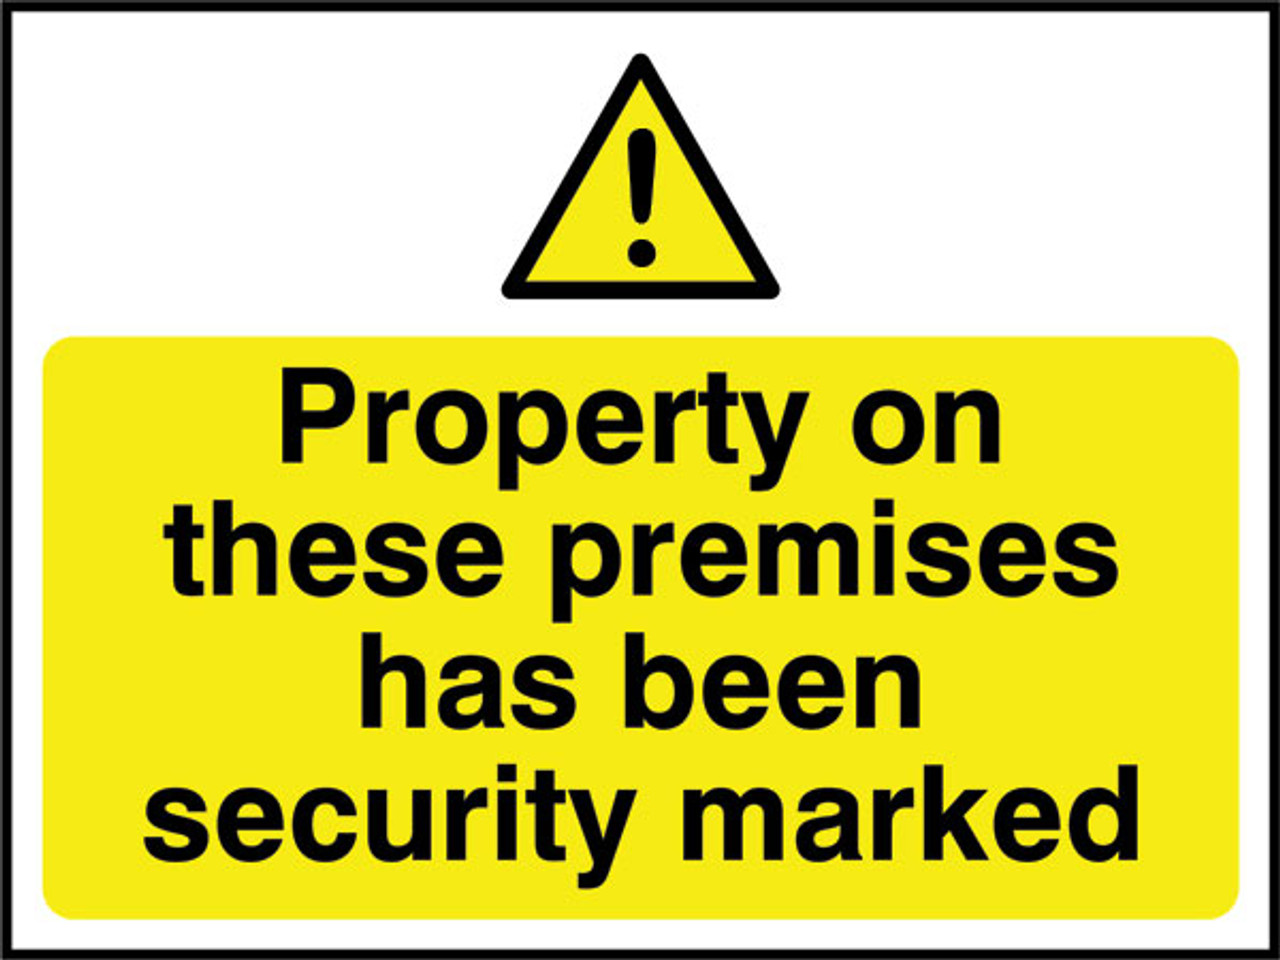 Property on these premises has been security marked